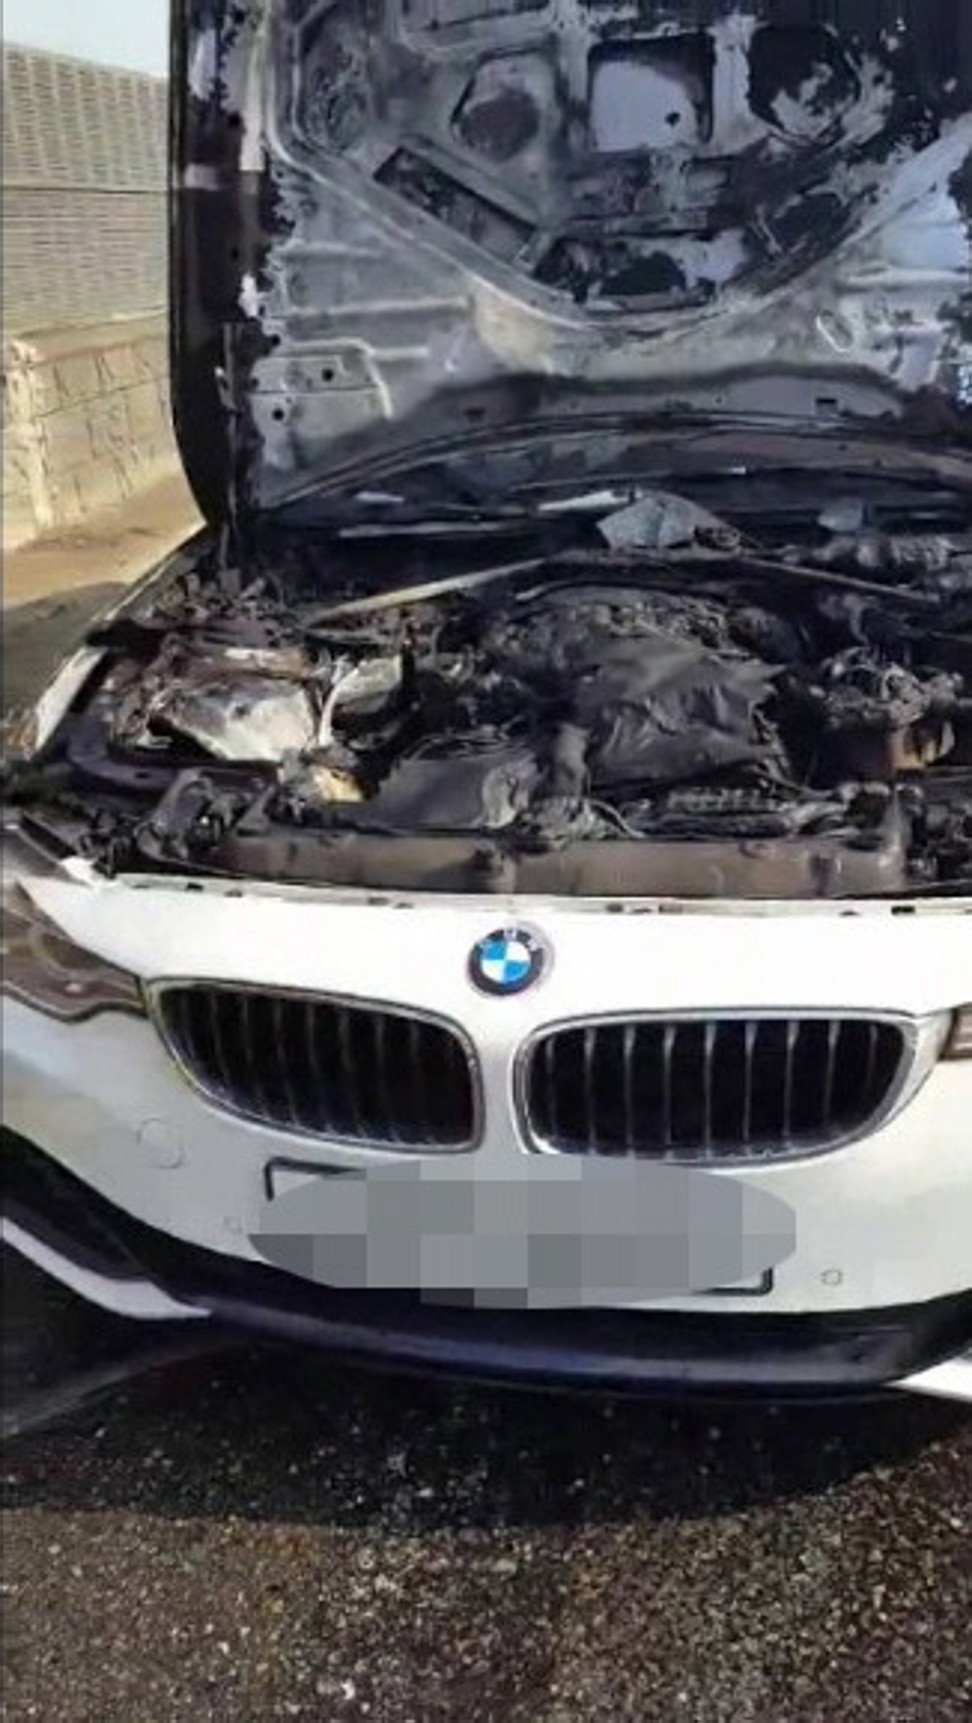 The burnt wreck of a BMW vehicle that caught fire on a highway in Incheon. Photo: EPA